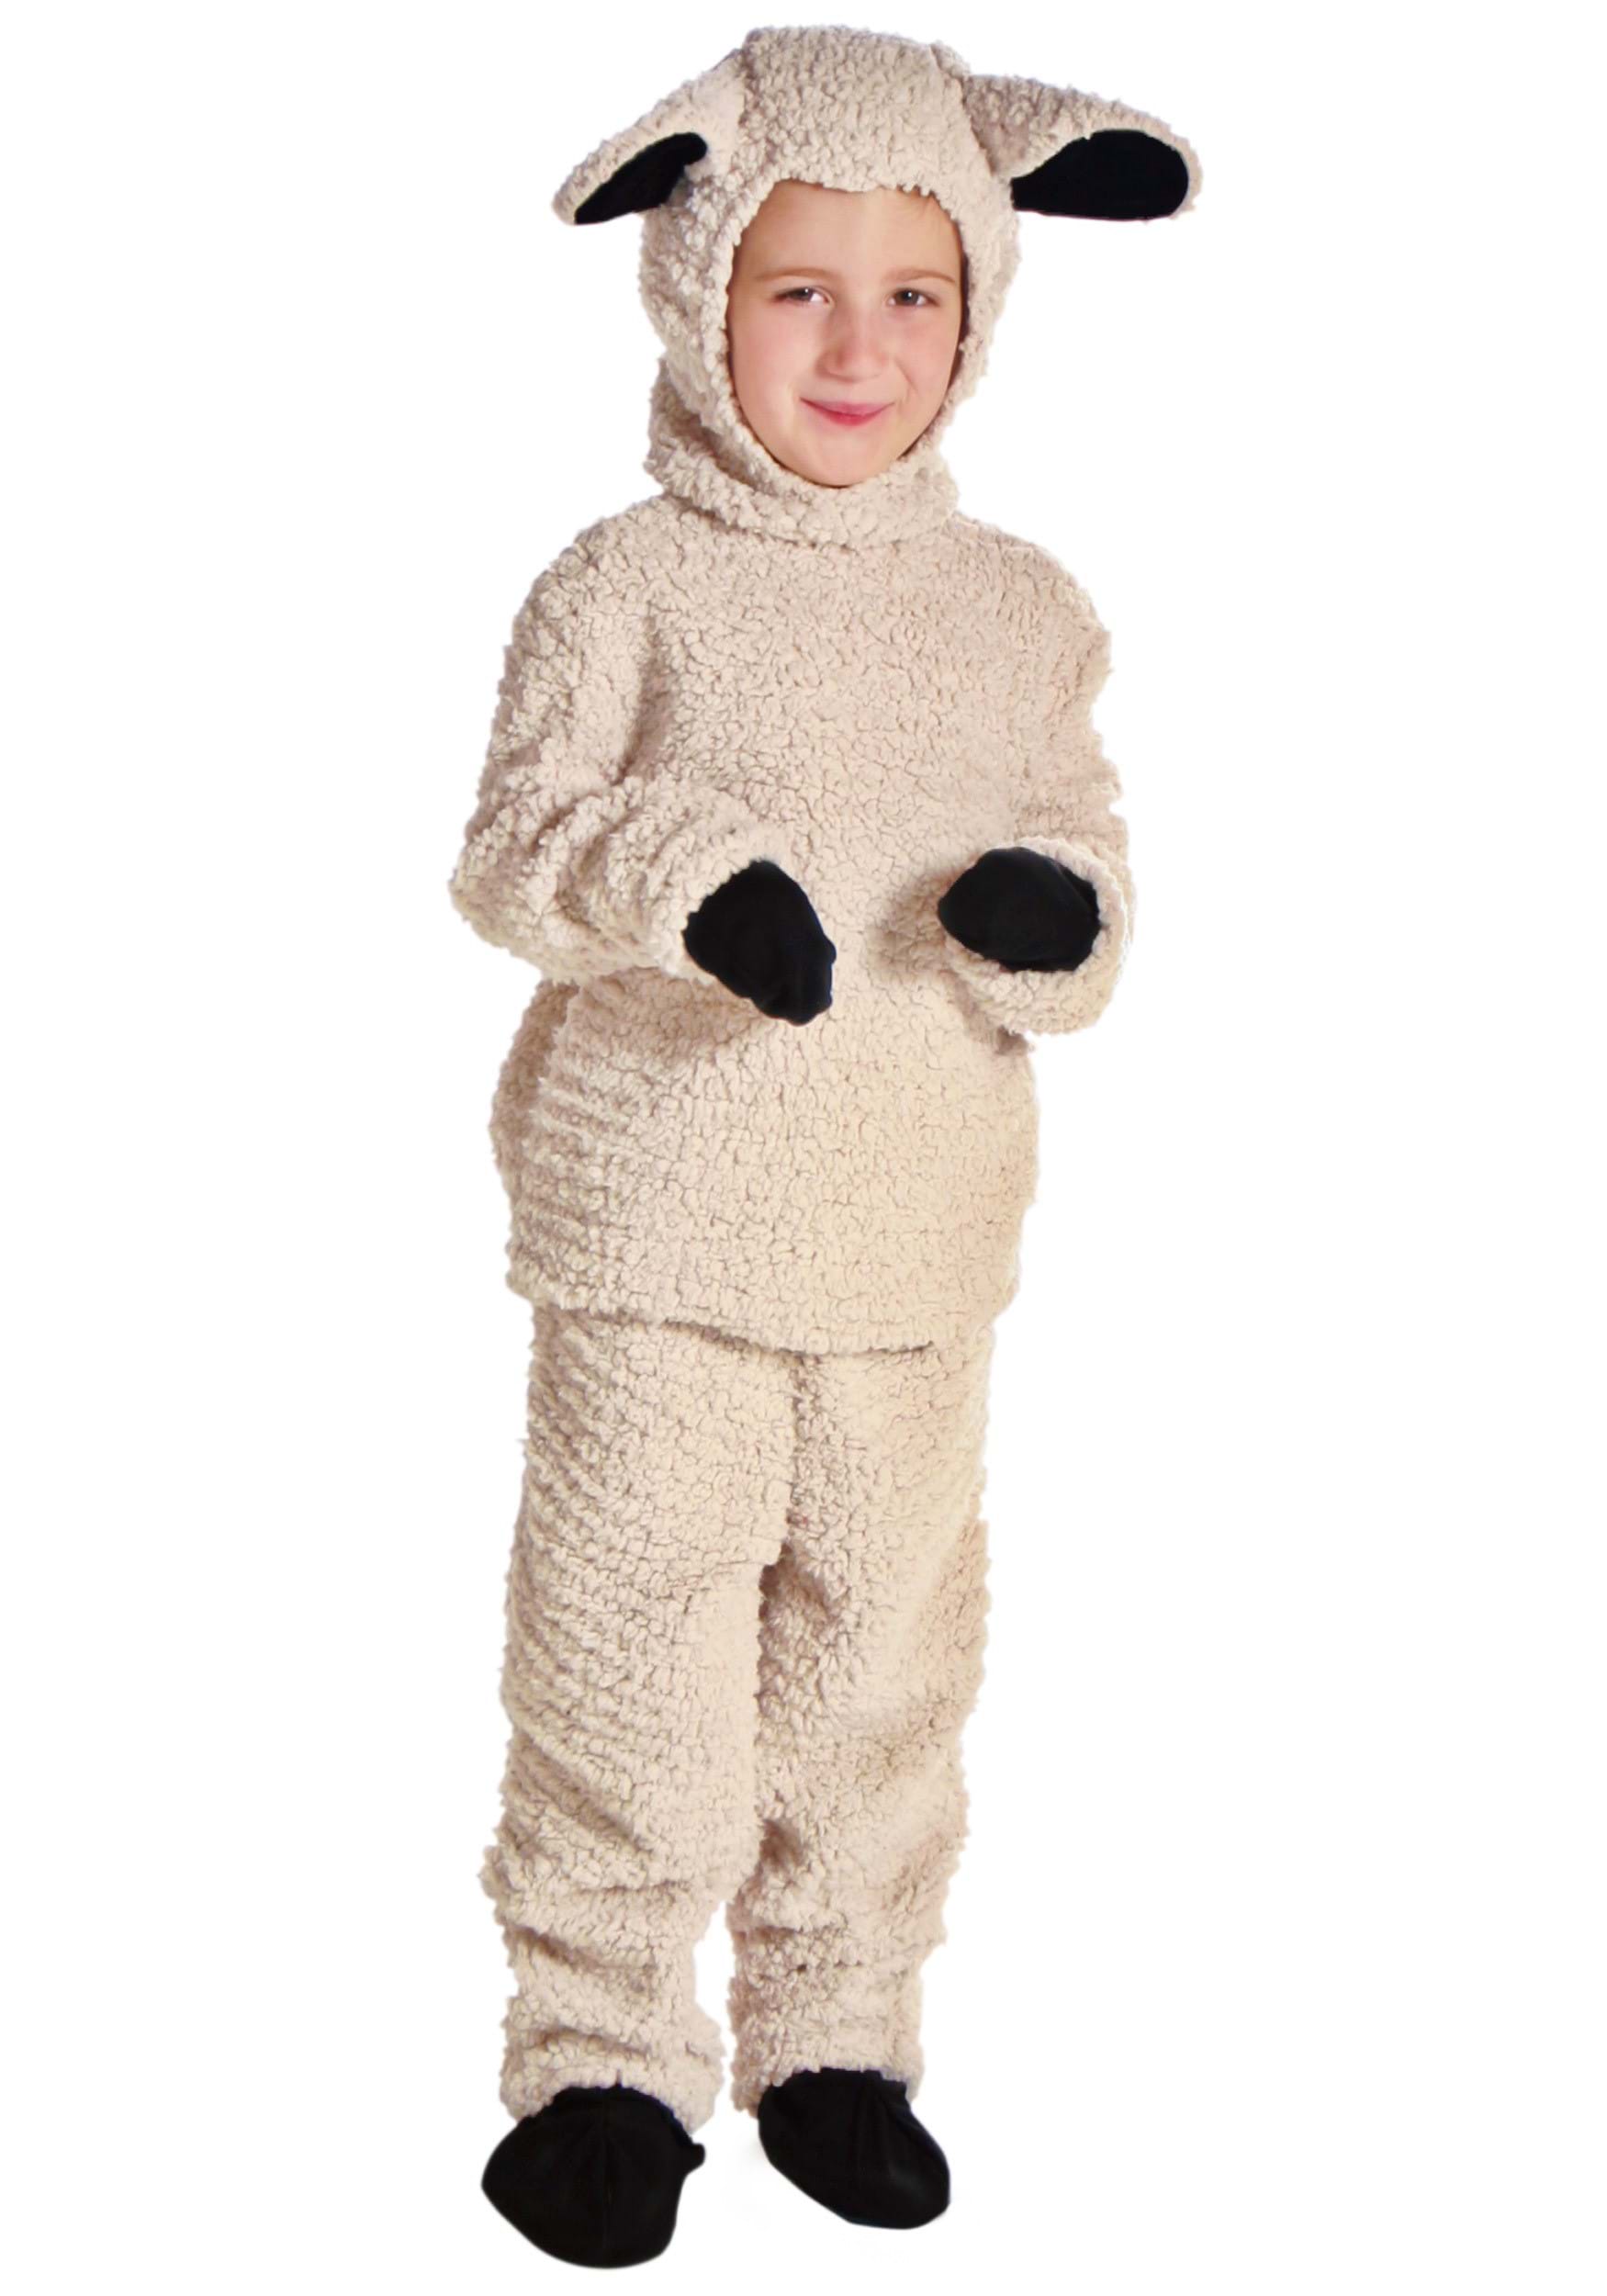 Photos - Fancy Dress FUN Costumes Woolly Sheep Costume for Kids | Exclusive | Made By Us Costum